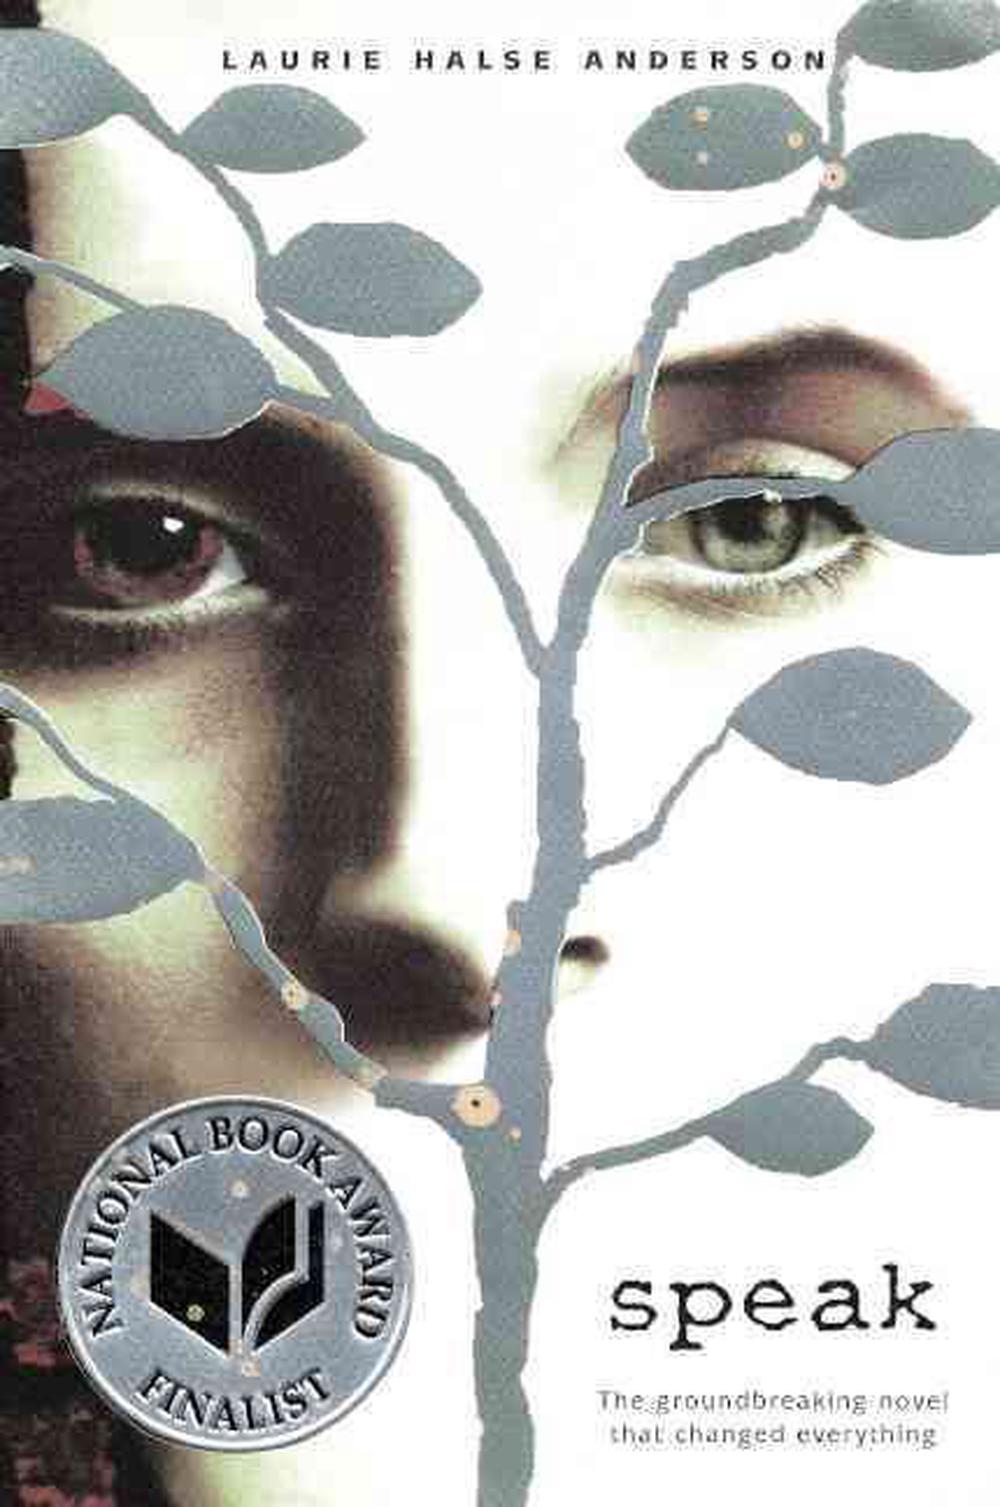 Speak By Laurie Halse Anderson: An Analysis